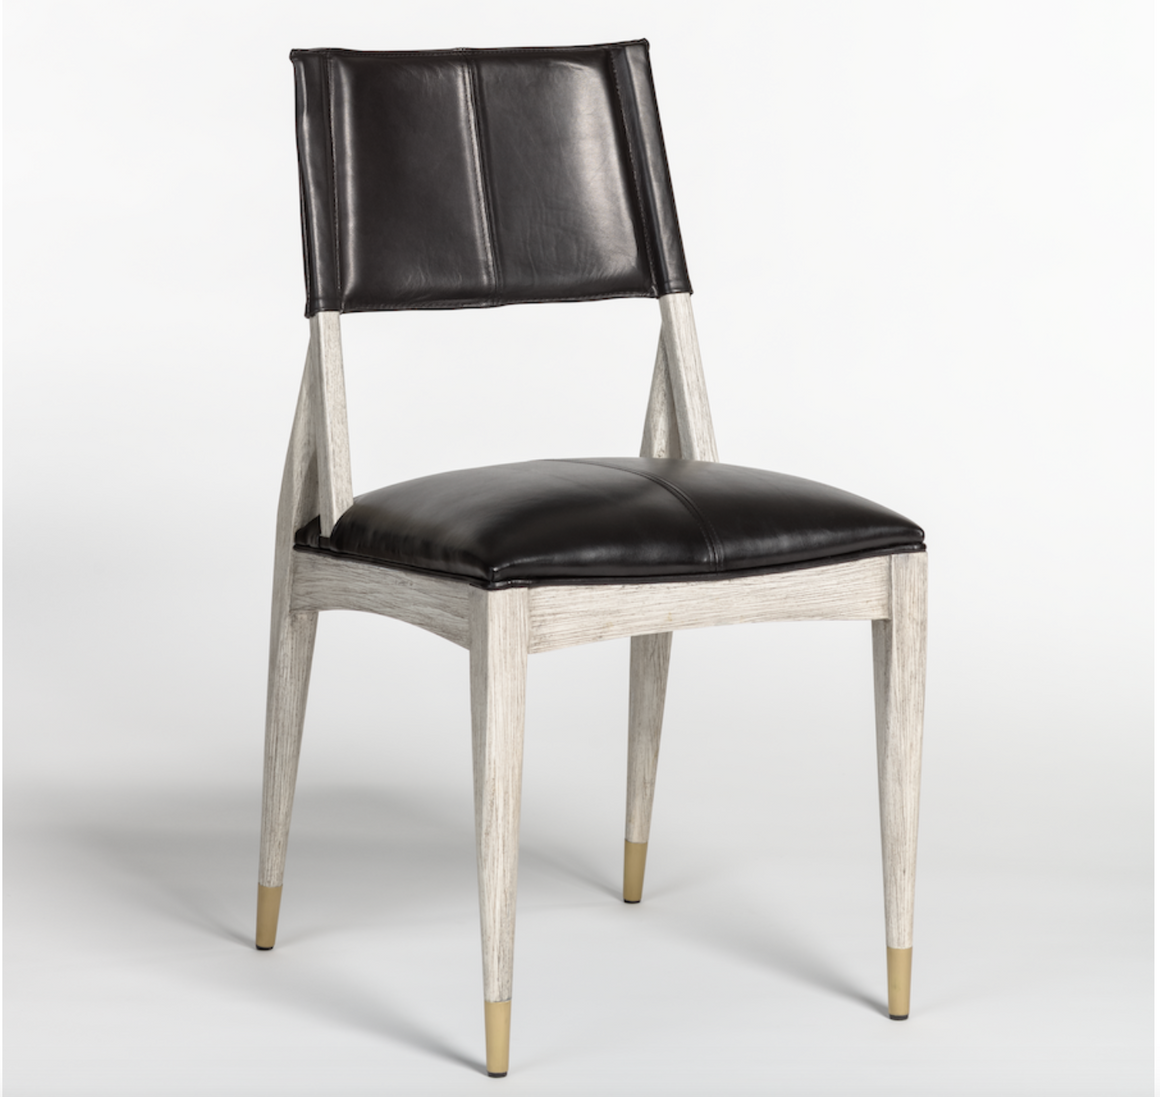 Finley Leather Dining Chair - Onyx - Classic Carolina Home